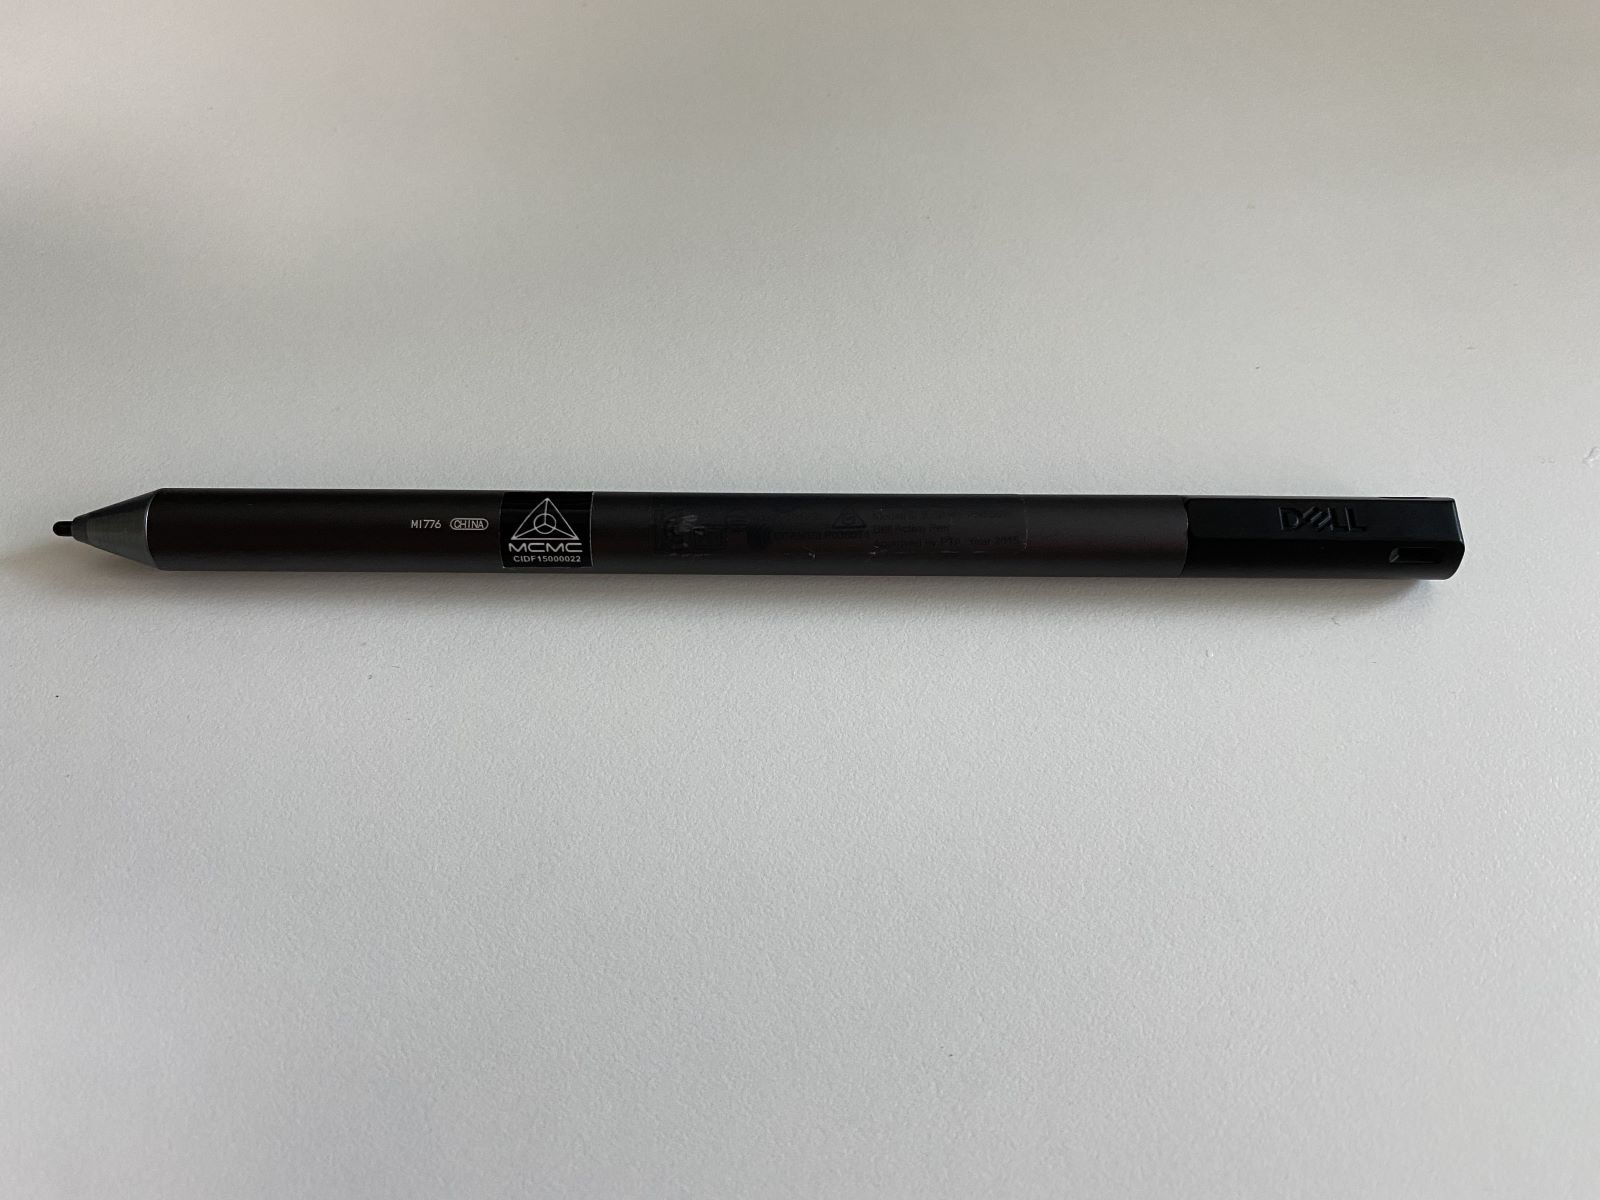 Connecting Dell Active Stylus: Step-by-Step Guide